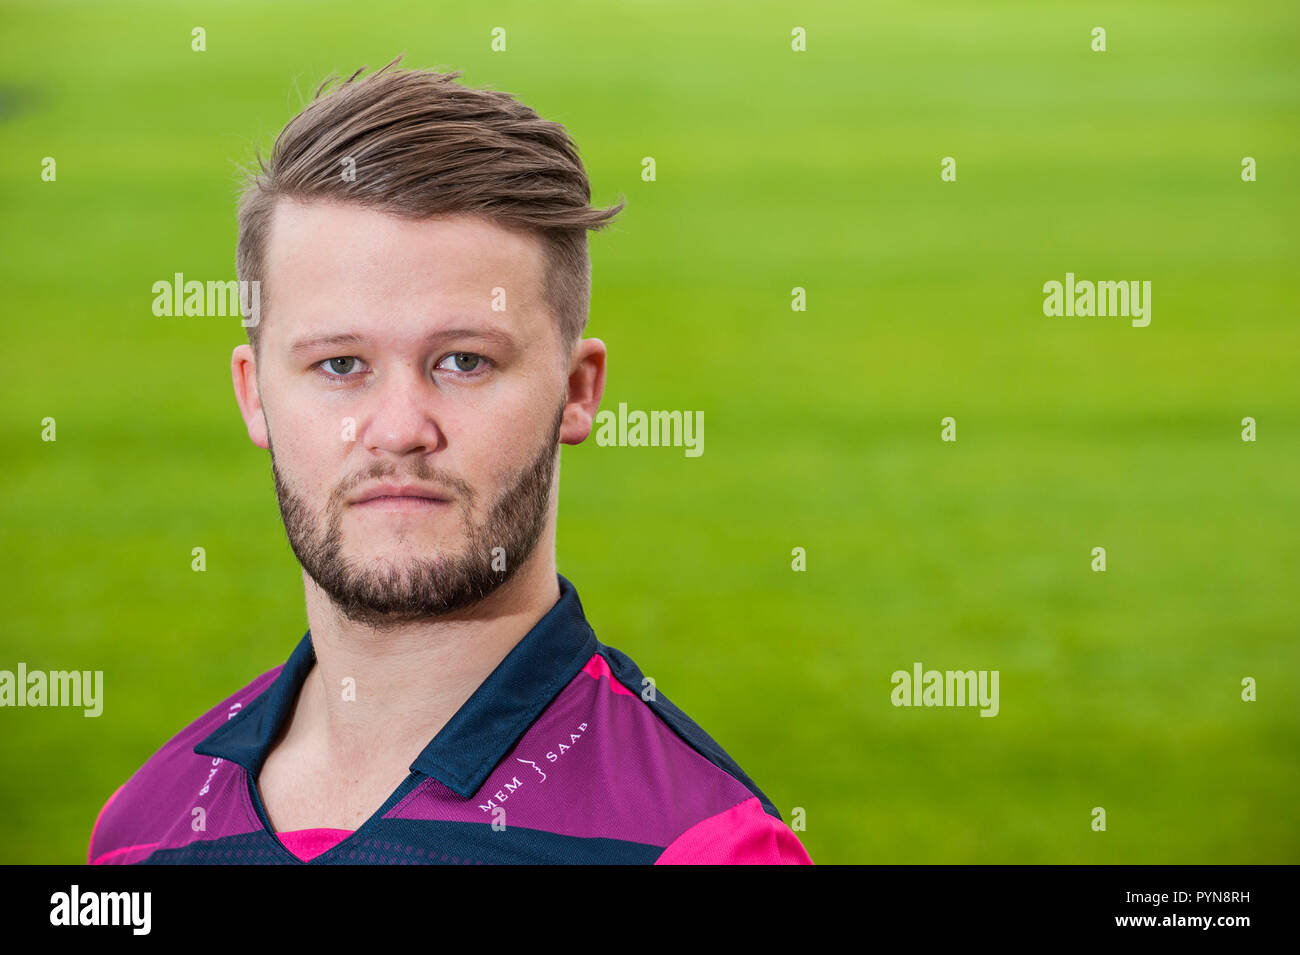 English cricketer, Ben Duckett who plays for Northamptonshire. © Lucy Young 2018 07799118984 lucyyounguk@gmail.com www.lucyyoungphotos.co.uk Stock Photo